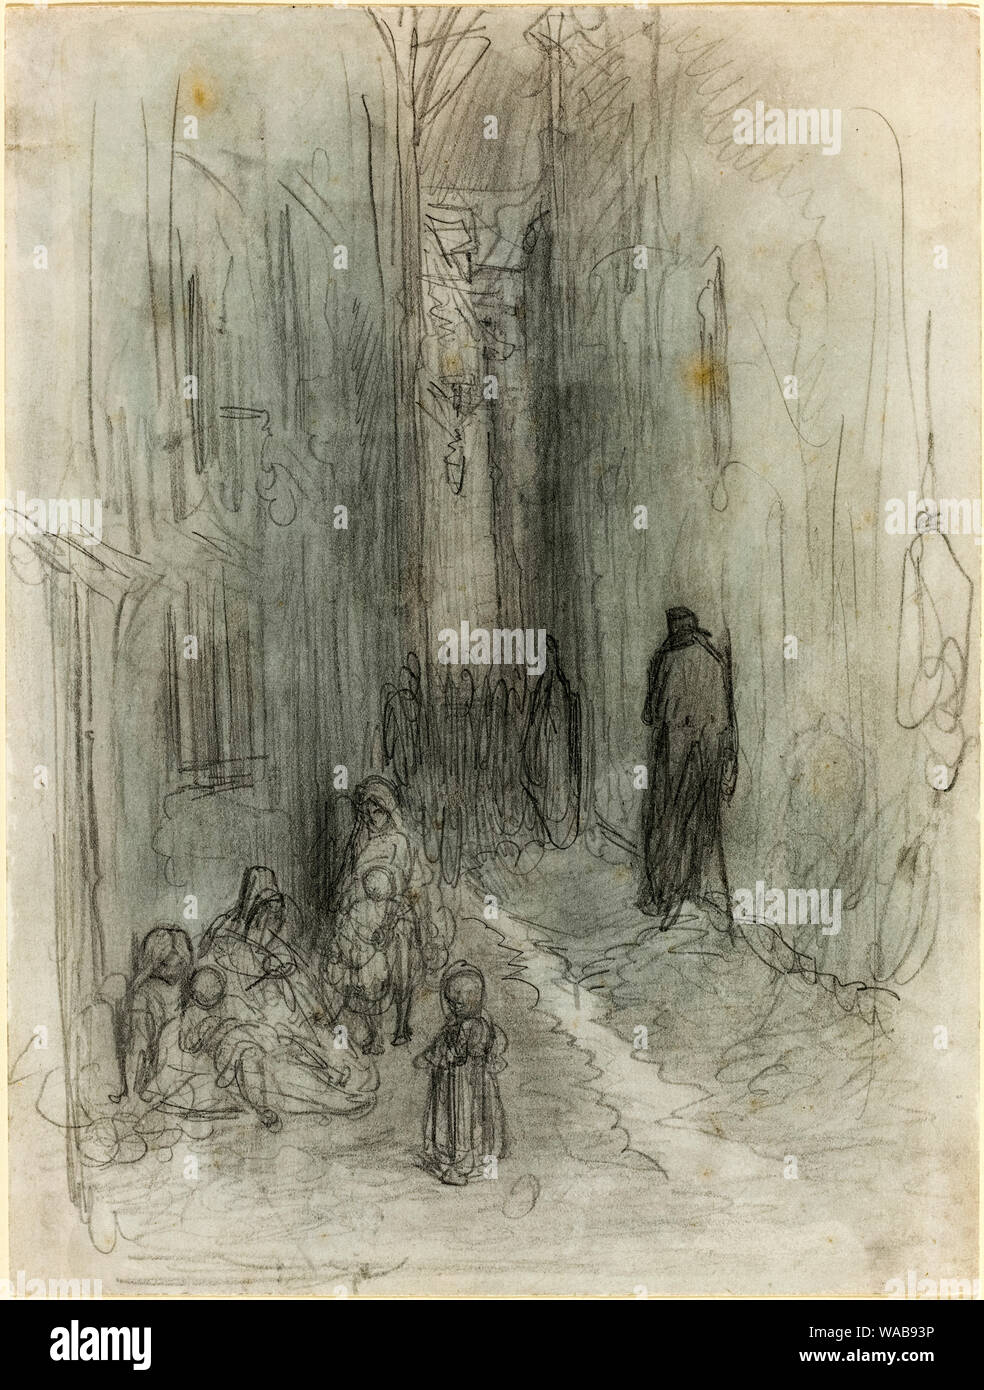 Gustave Doré, A Backstreet in London, drawing, 1868 Stock Photo